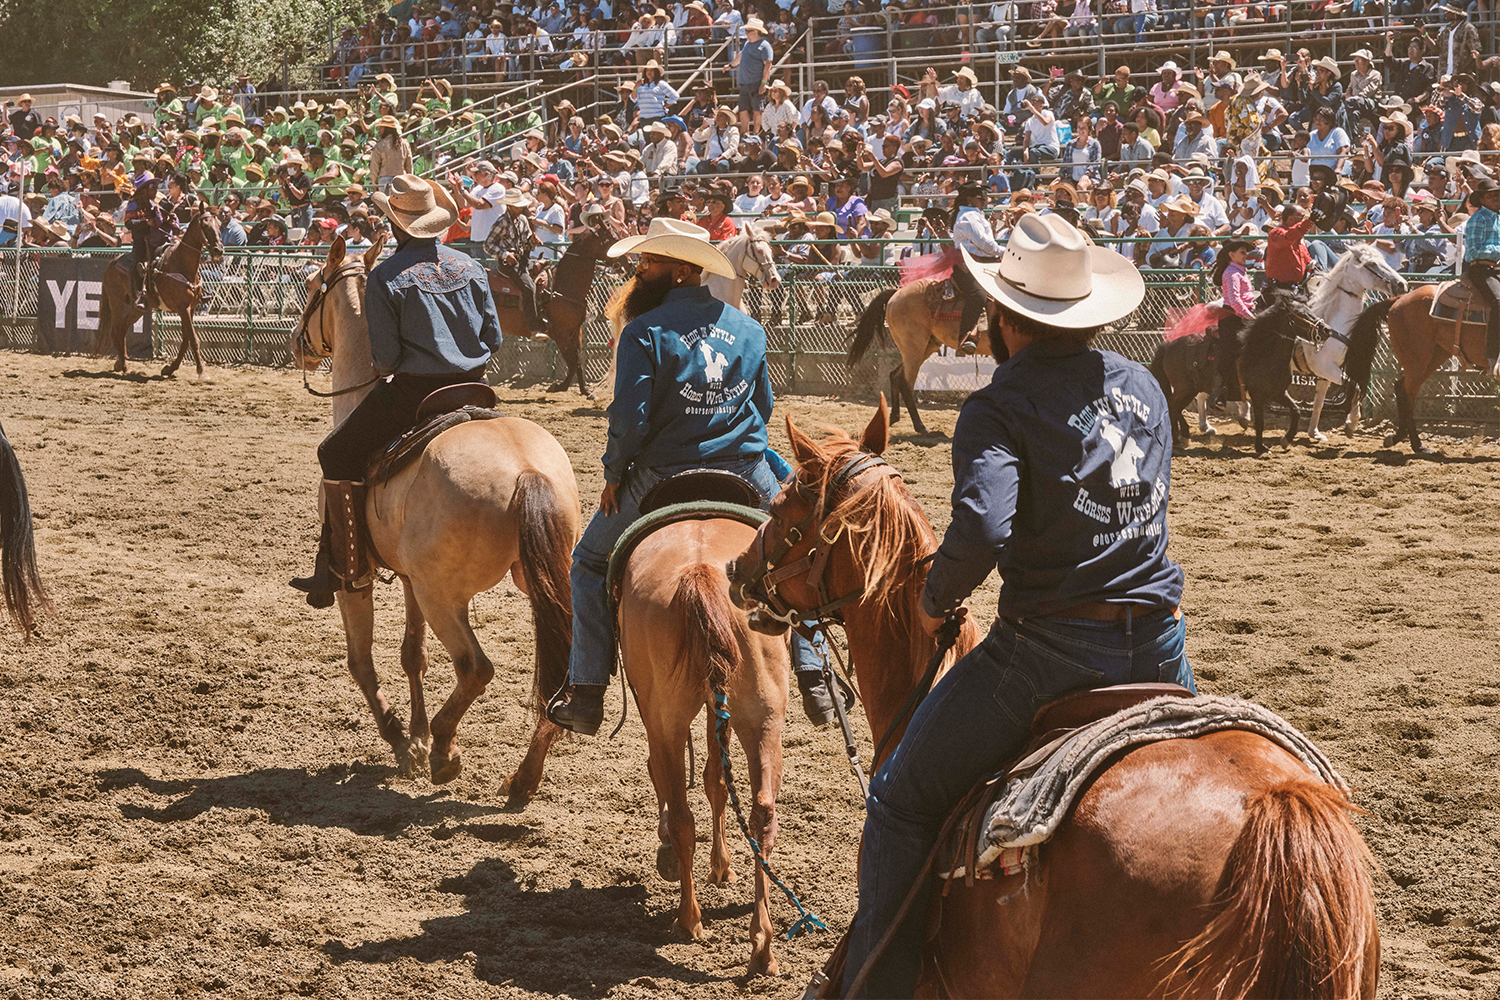 Behind the Scenes at America’s Only Touring Black Rodeo LaptrinhX / News